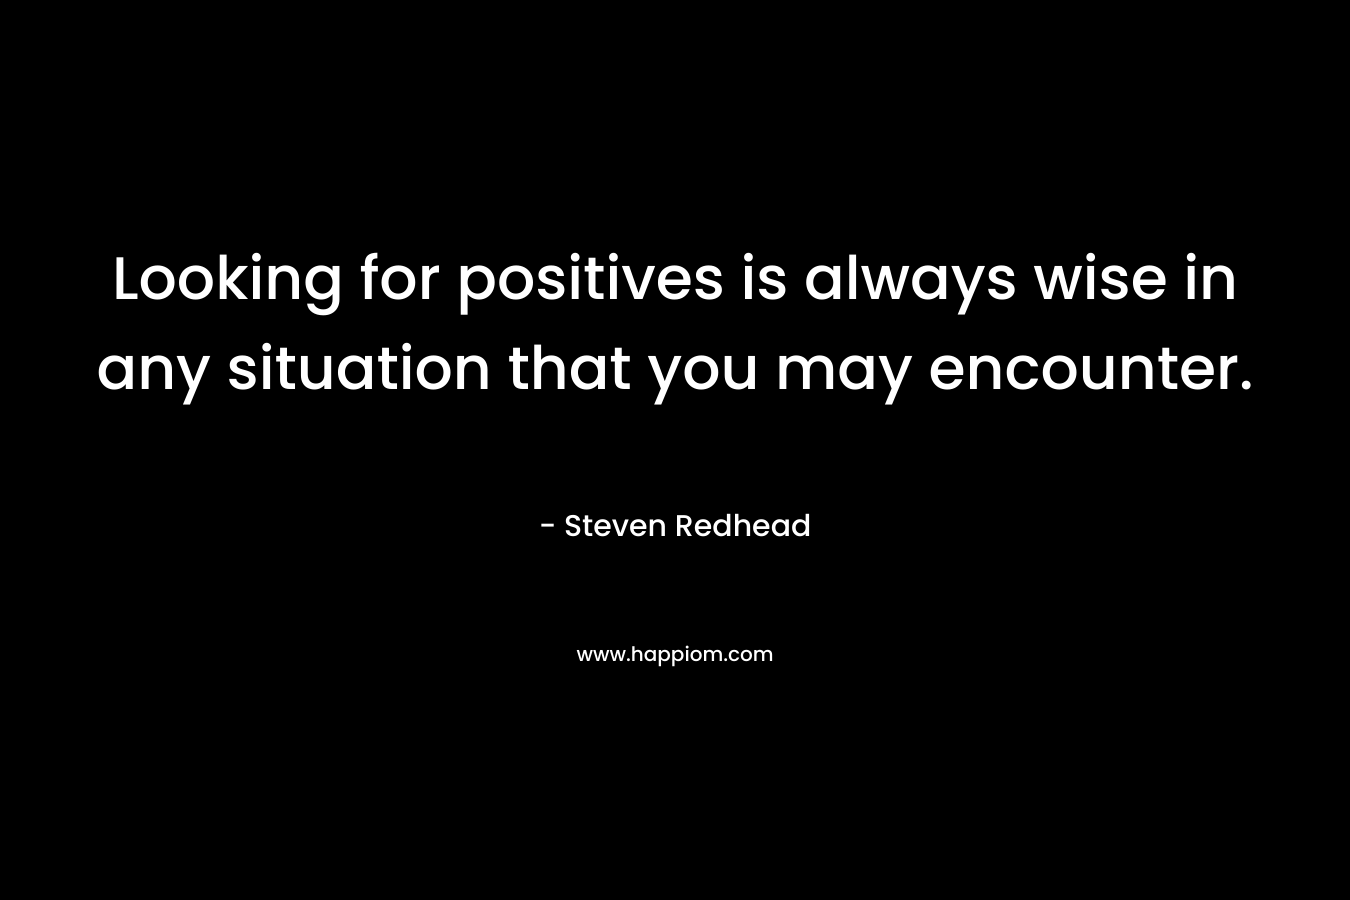 Looking for positives is always wise in any situation that you may encounter. – Steven Redhead